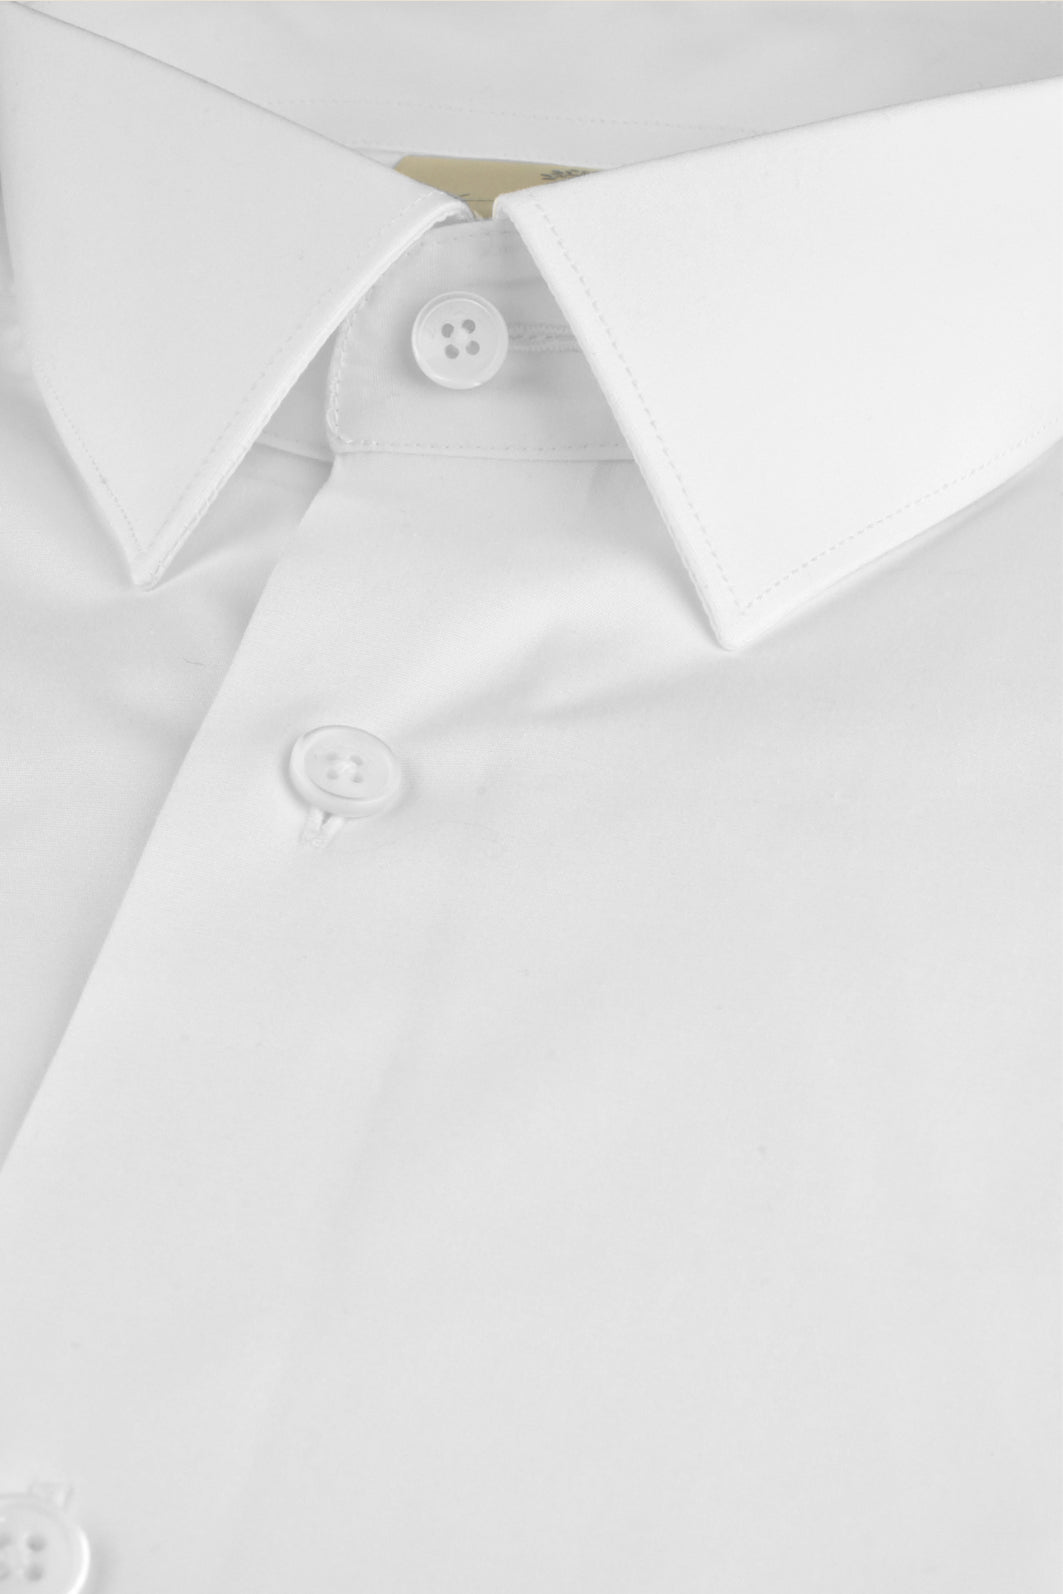 White business shirt made of organic cotton with a classic collar - Made to order